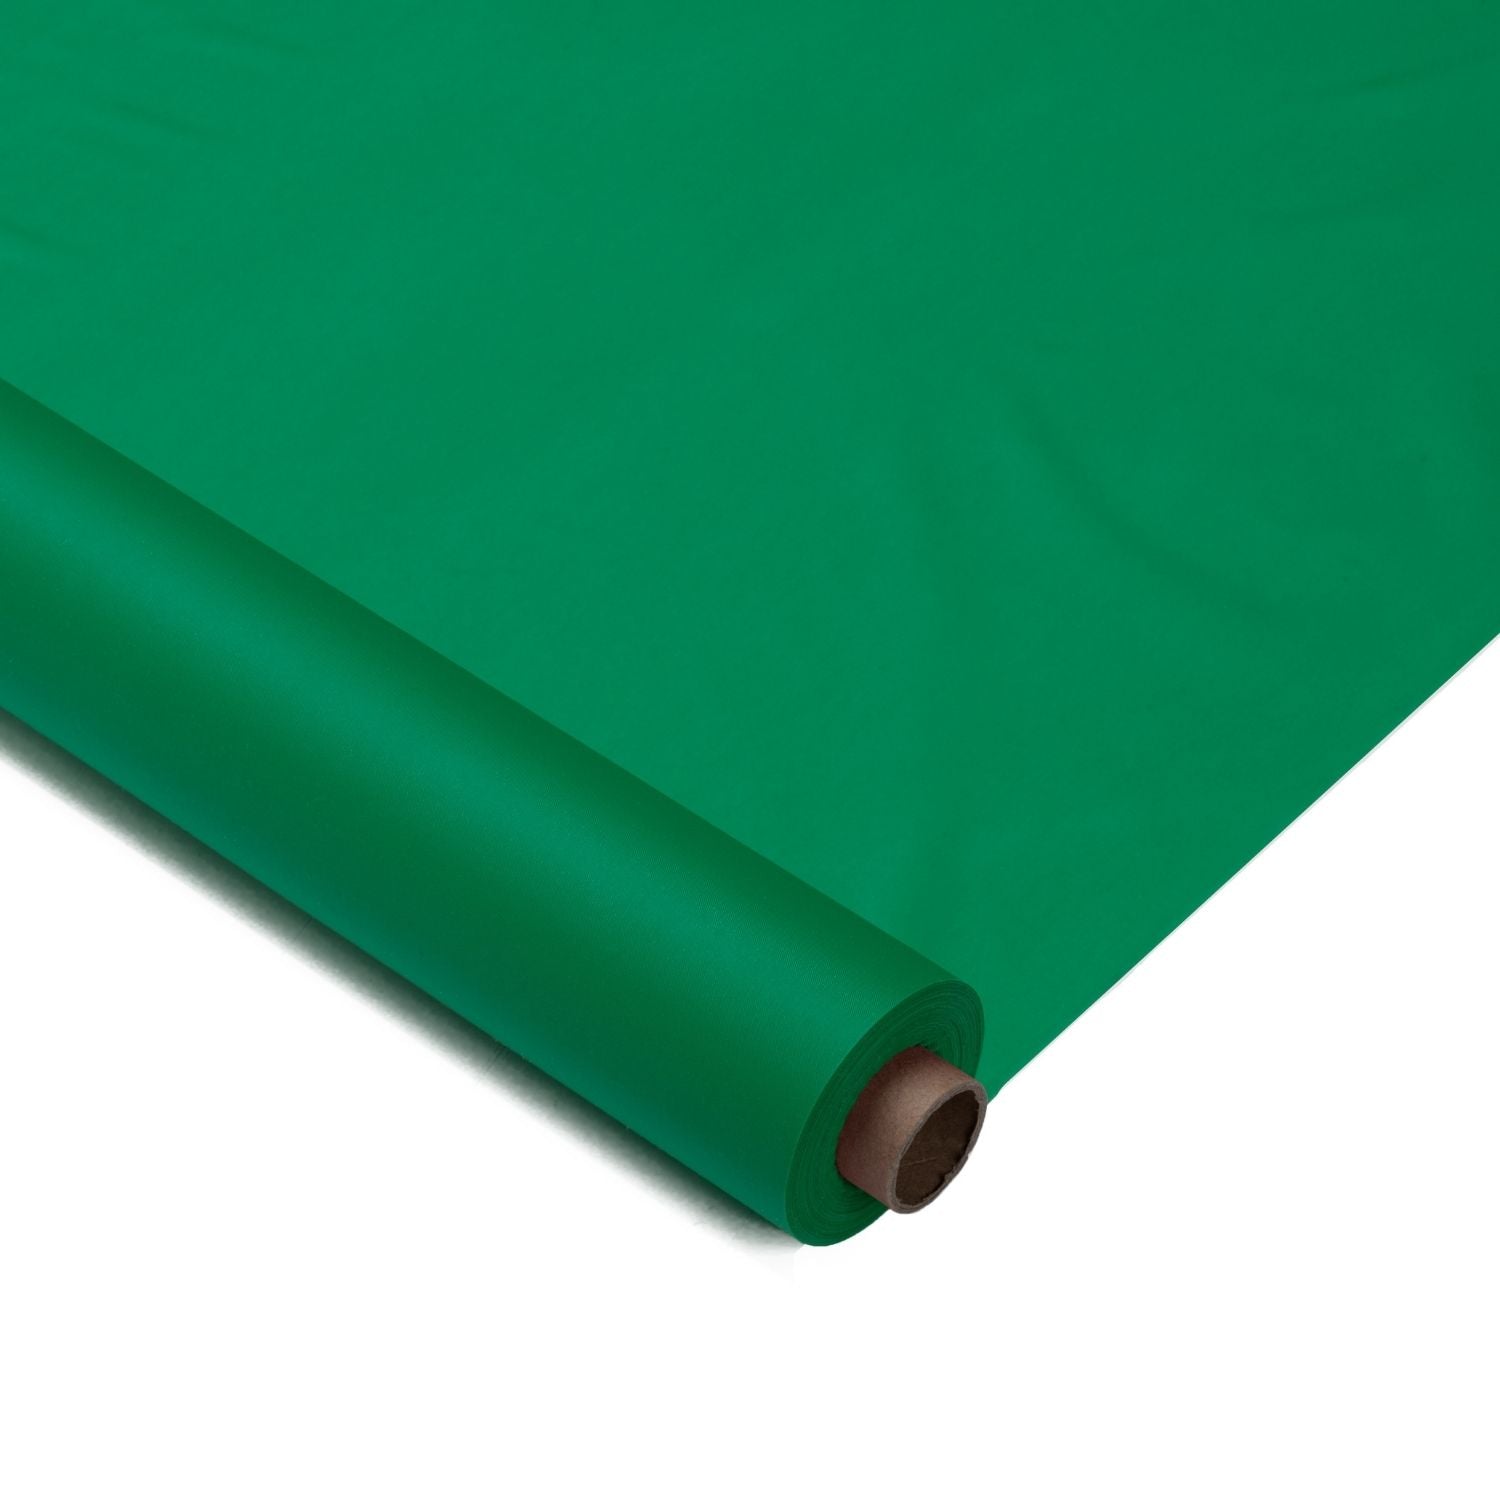 40 In. X 300 Ft. Premium Emerald Green Plastic Table Roll | 4 Pack